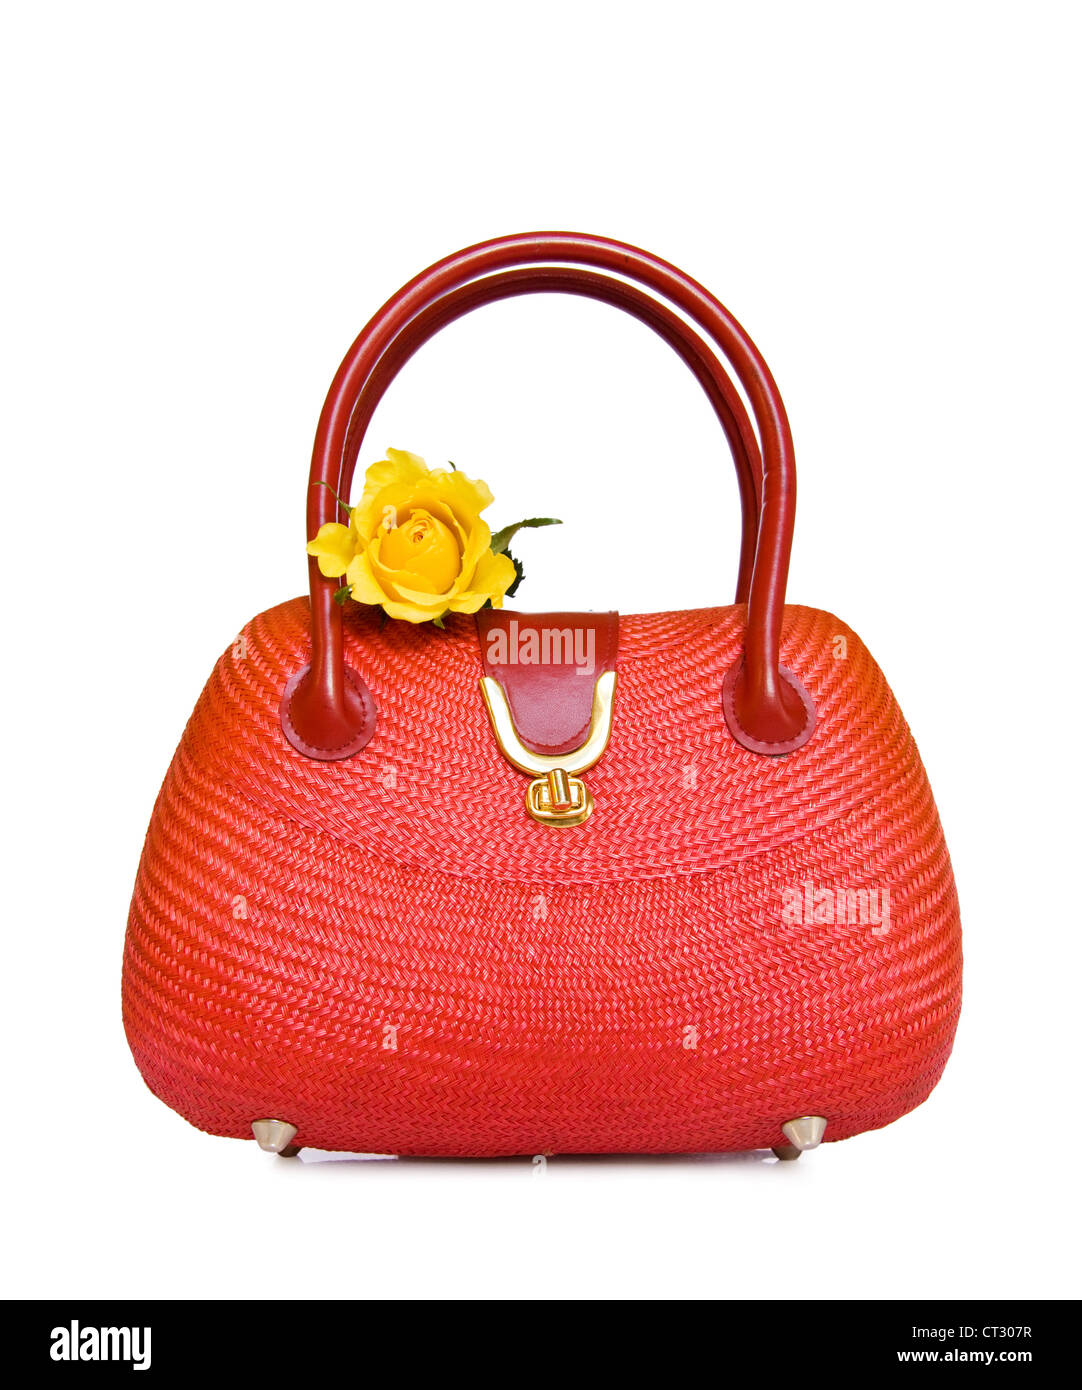 Vintage red straw handbag with yellow rose. Isolated over white background. Stock Photo